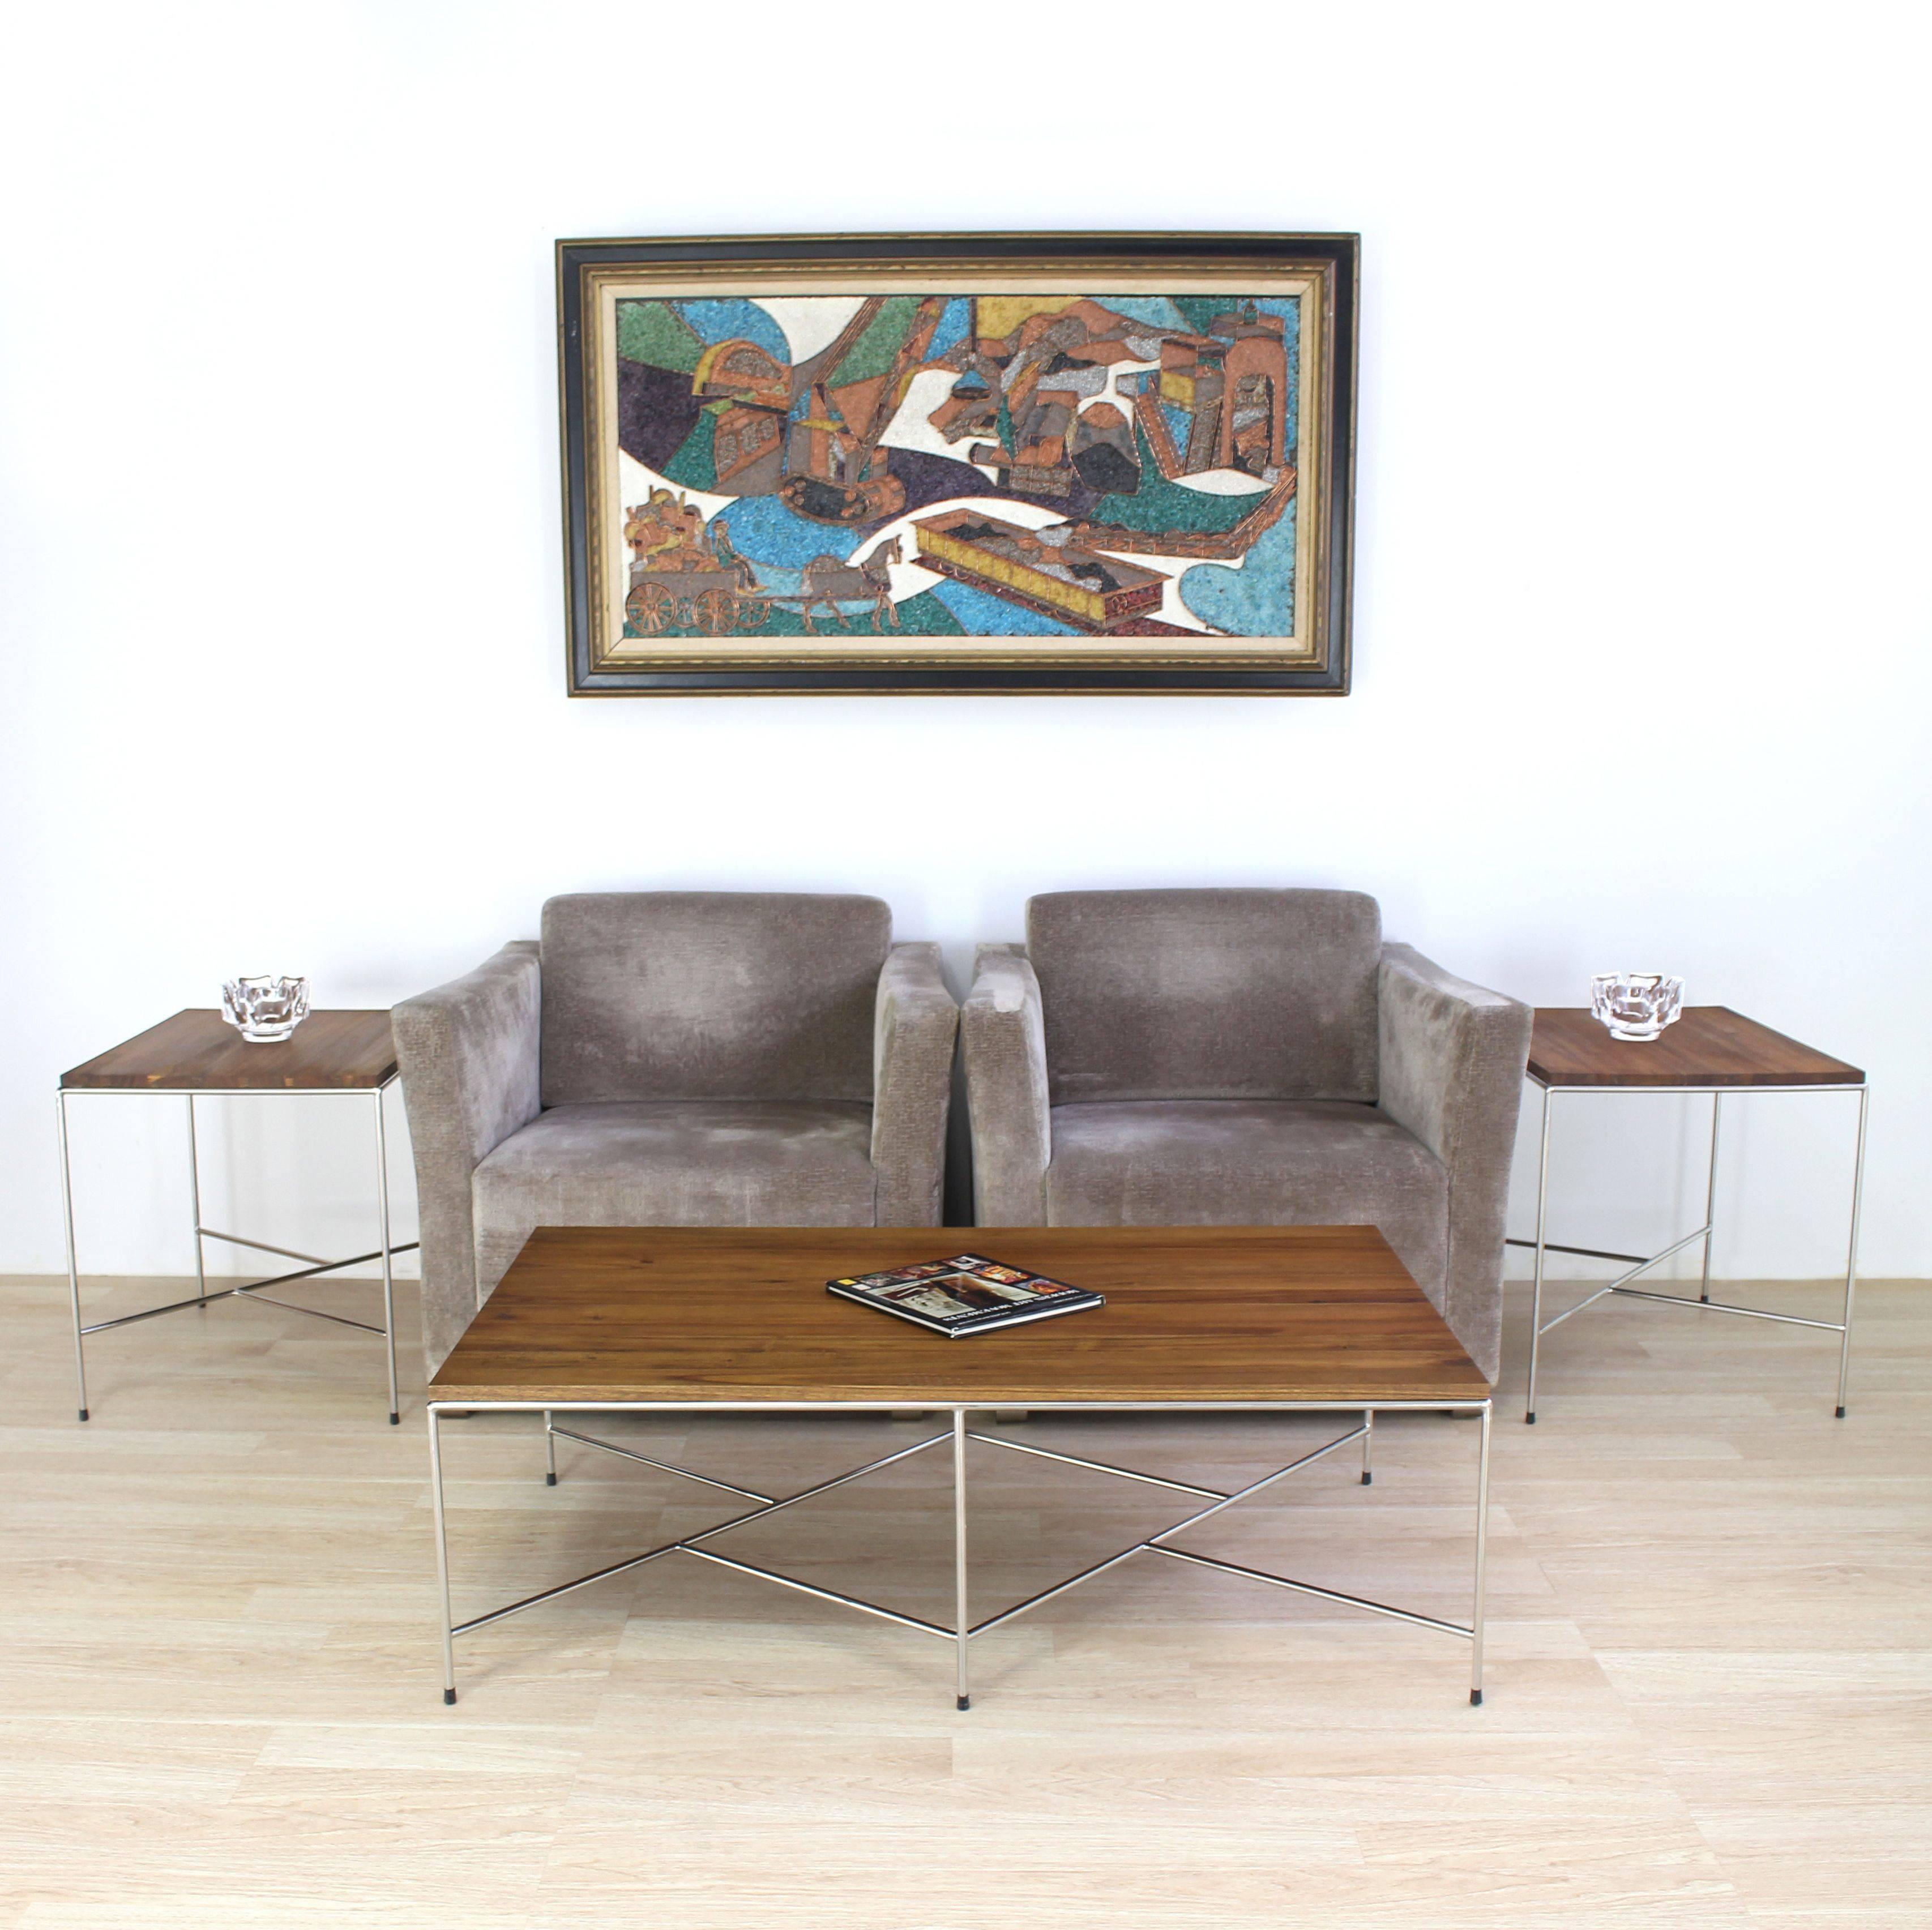 Established Lines, Mid Century Modern or Bauhaus era decor coffee table. Nice rectangle shape with good medium size proportions. The base is meticulosly welded out of solid stainless steel rod and then polished to a mirror like finish. Solid 3/4″